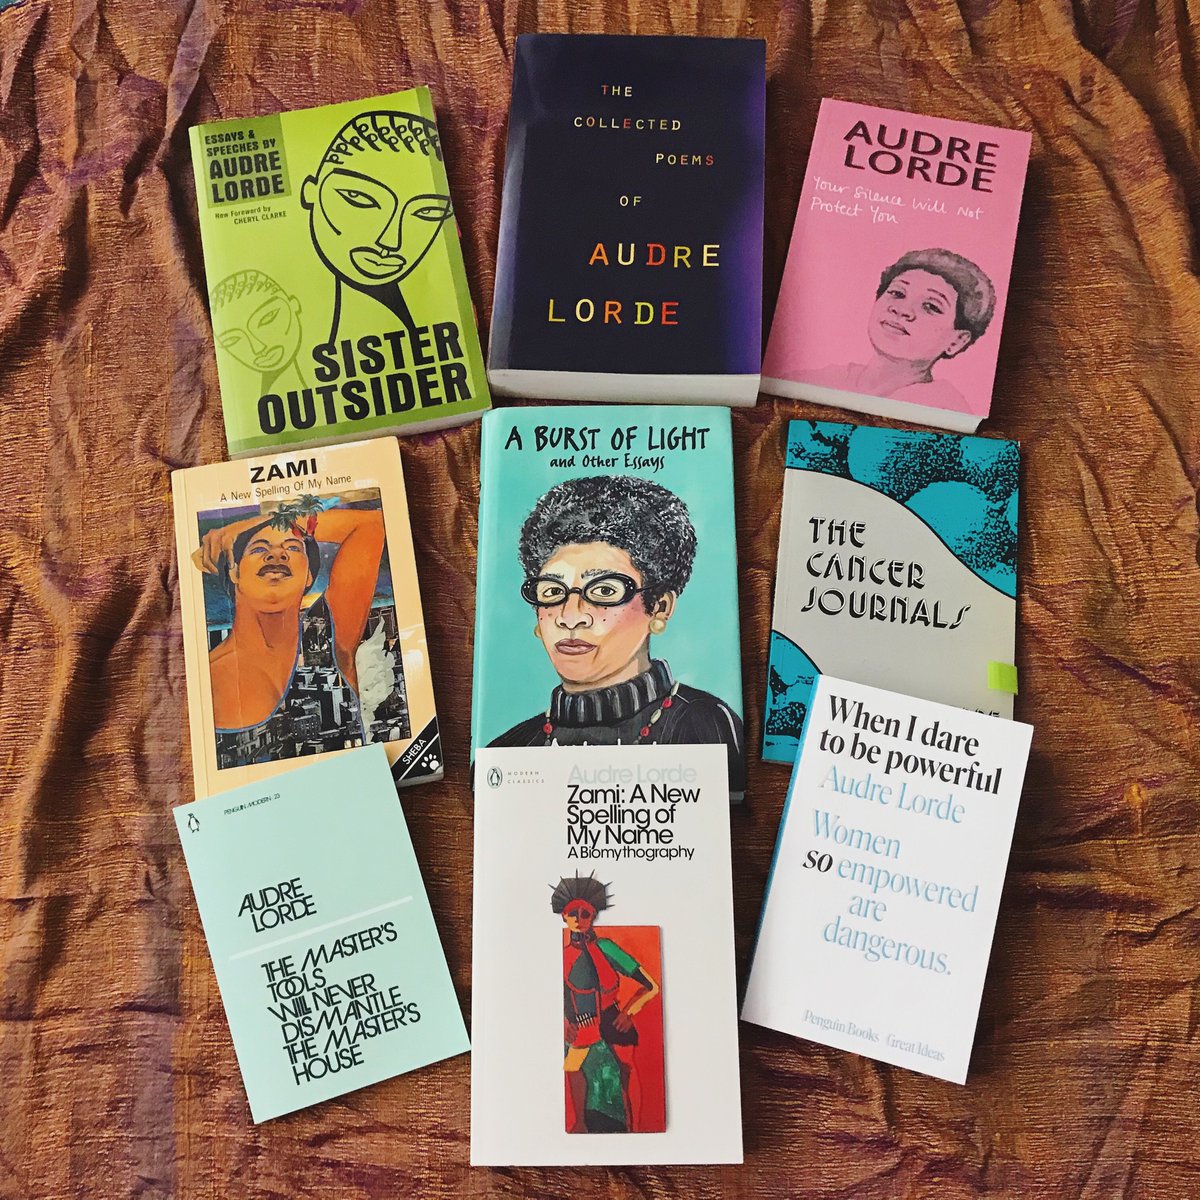 My first addition to  #OurFeministLibrary would be the complete works of Audre Lorde. Her insight into the politics of patriarchy, understanding of lesbian consciousness, and unflinching ability to speak truth to power all made her a vital feminist thinker. And her poetry is lush.